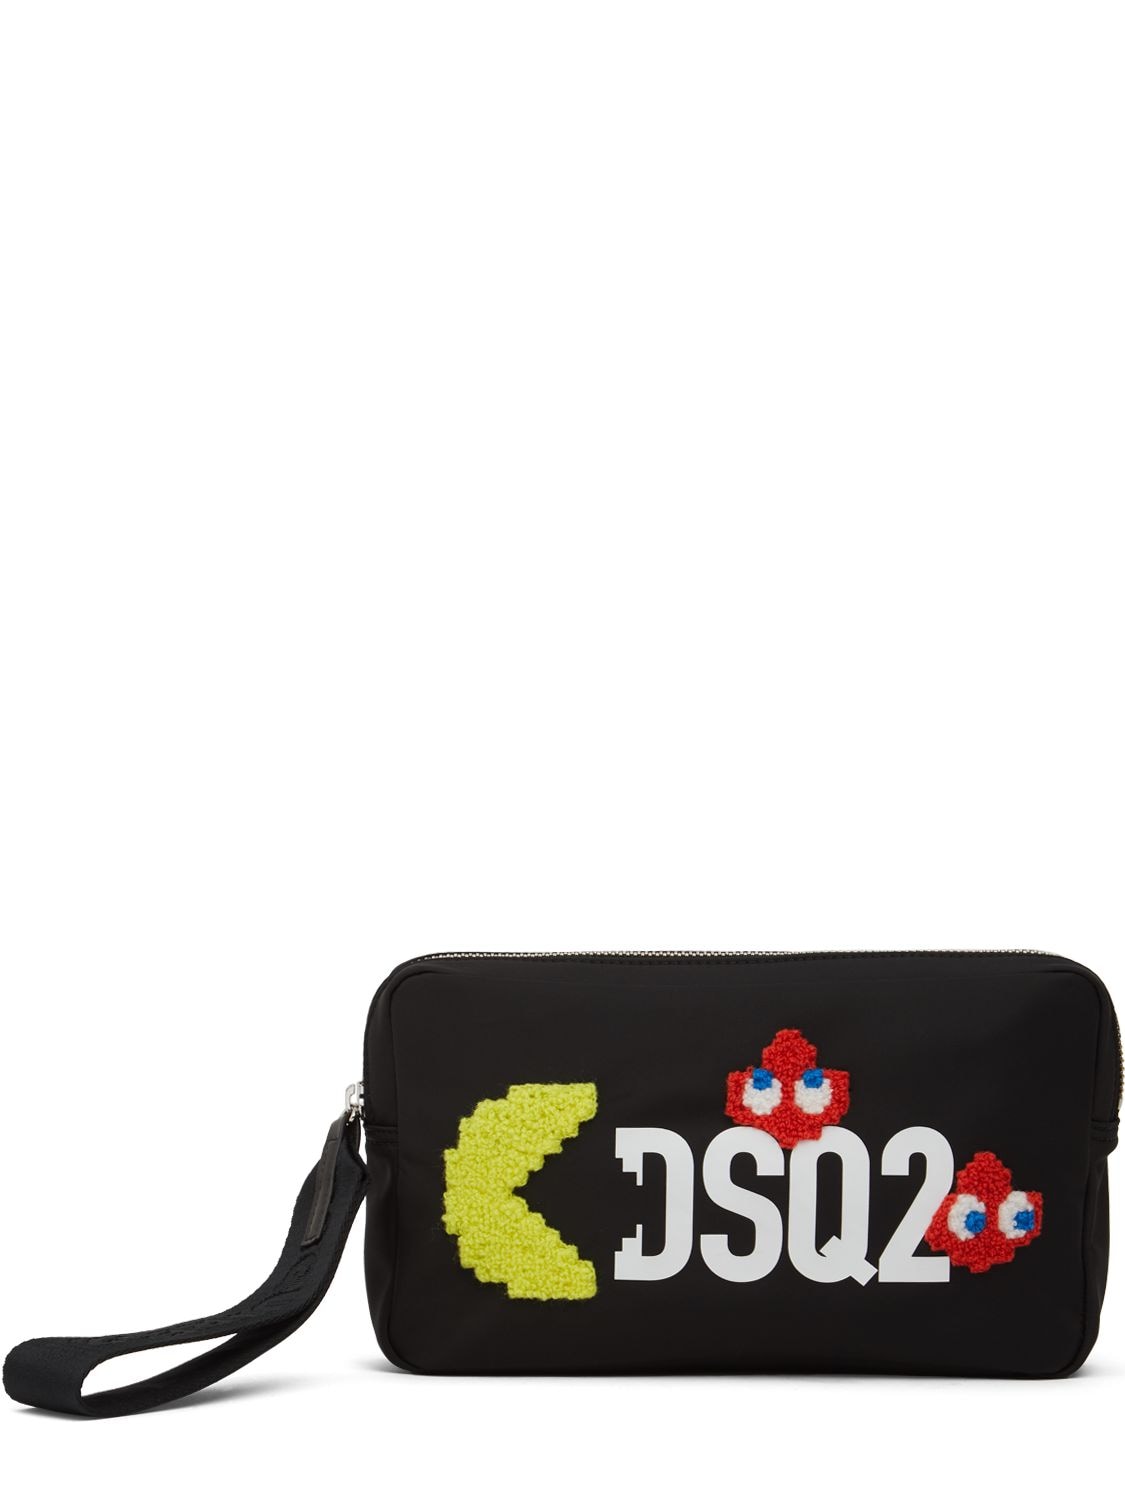 DSQUARED2 PAC-MAN TOILETRY BAG